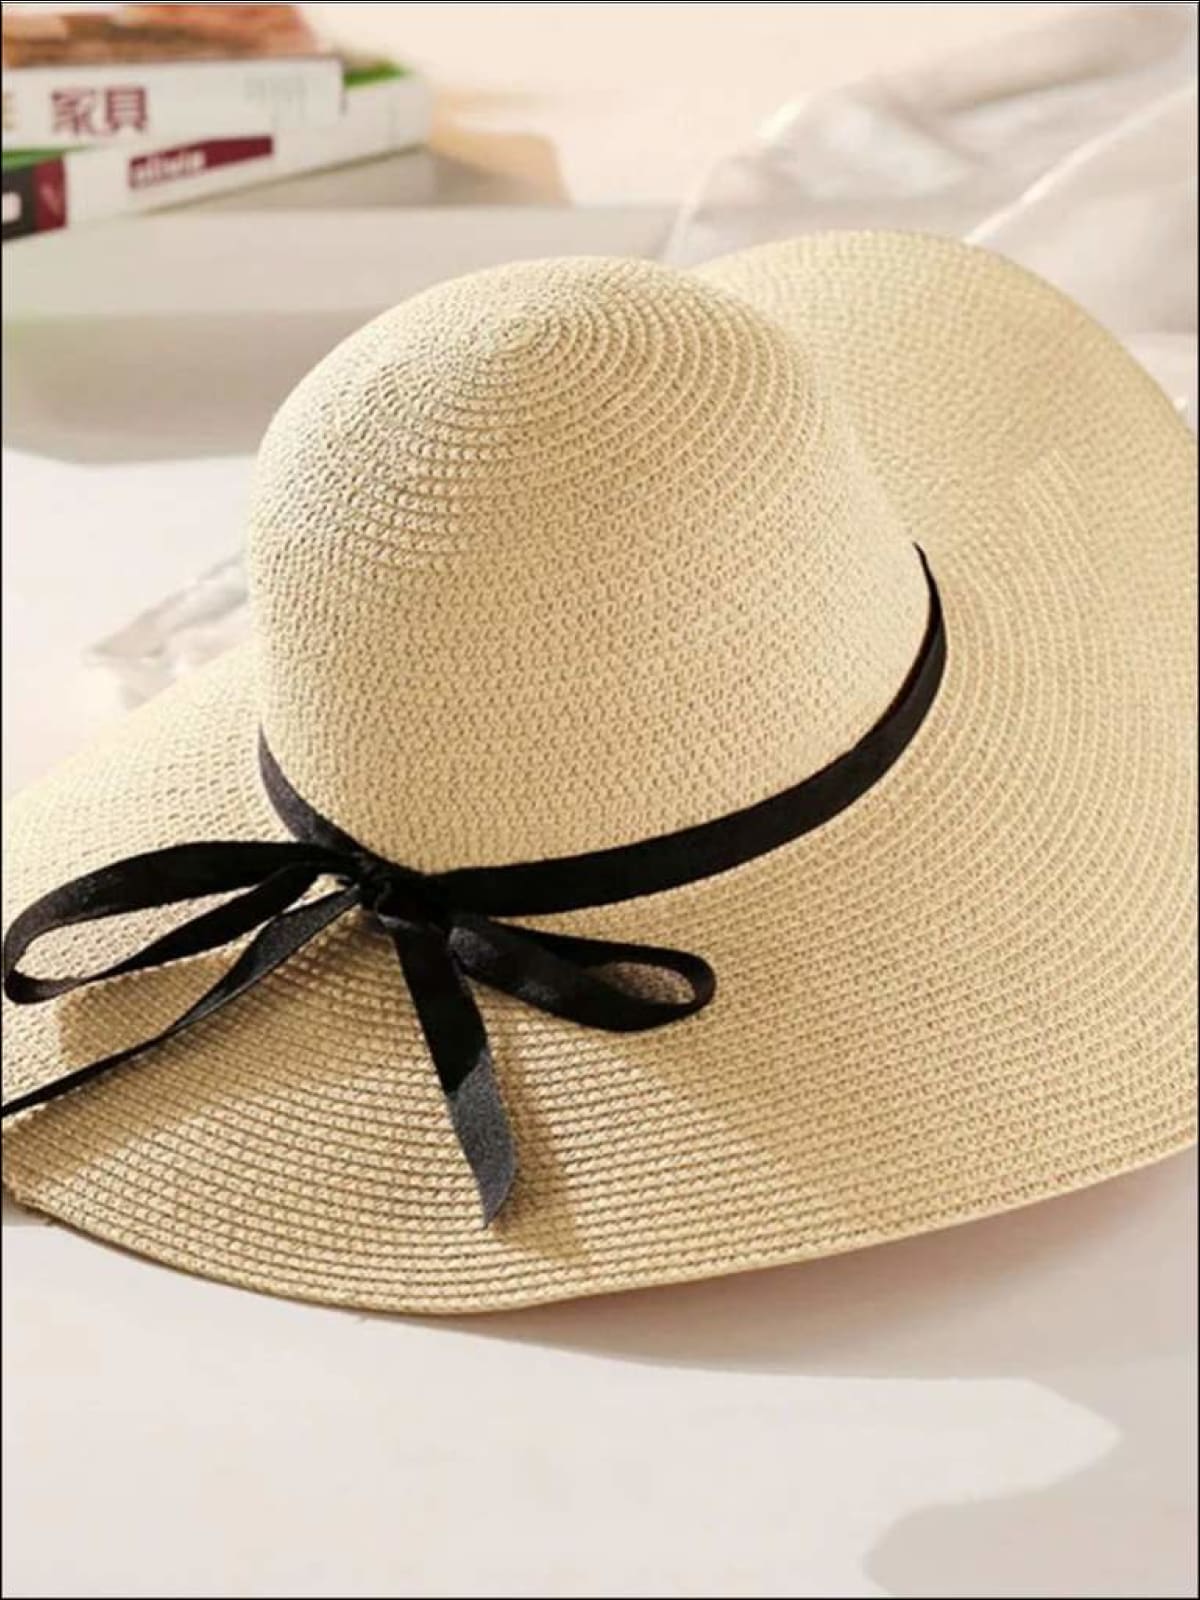 https://cdn.shopify.com/s/files/1/0996/1812/products/womens-wide-brim-straw-hat-with-black-ribbon-beige-19-99-and-under-20-39-40-59-bfcutoff-accessories-mia-belle-overseas-fulfillment-baby_878.jpg